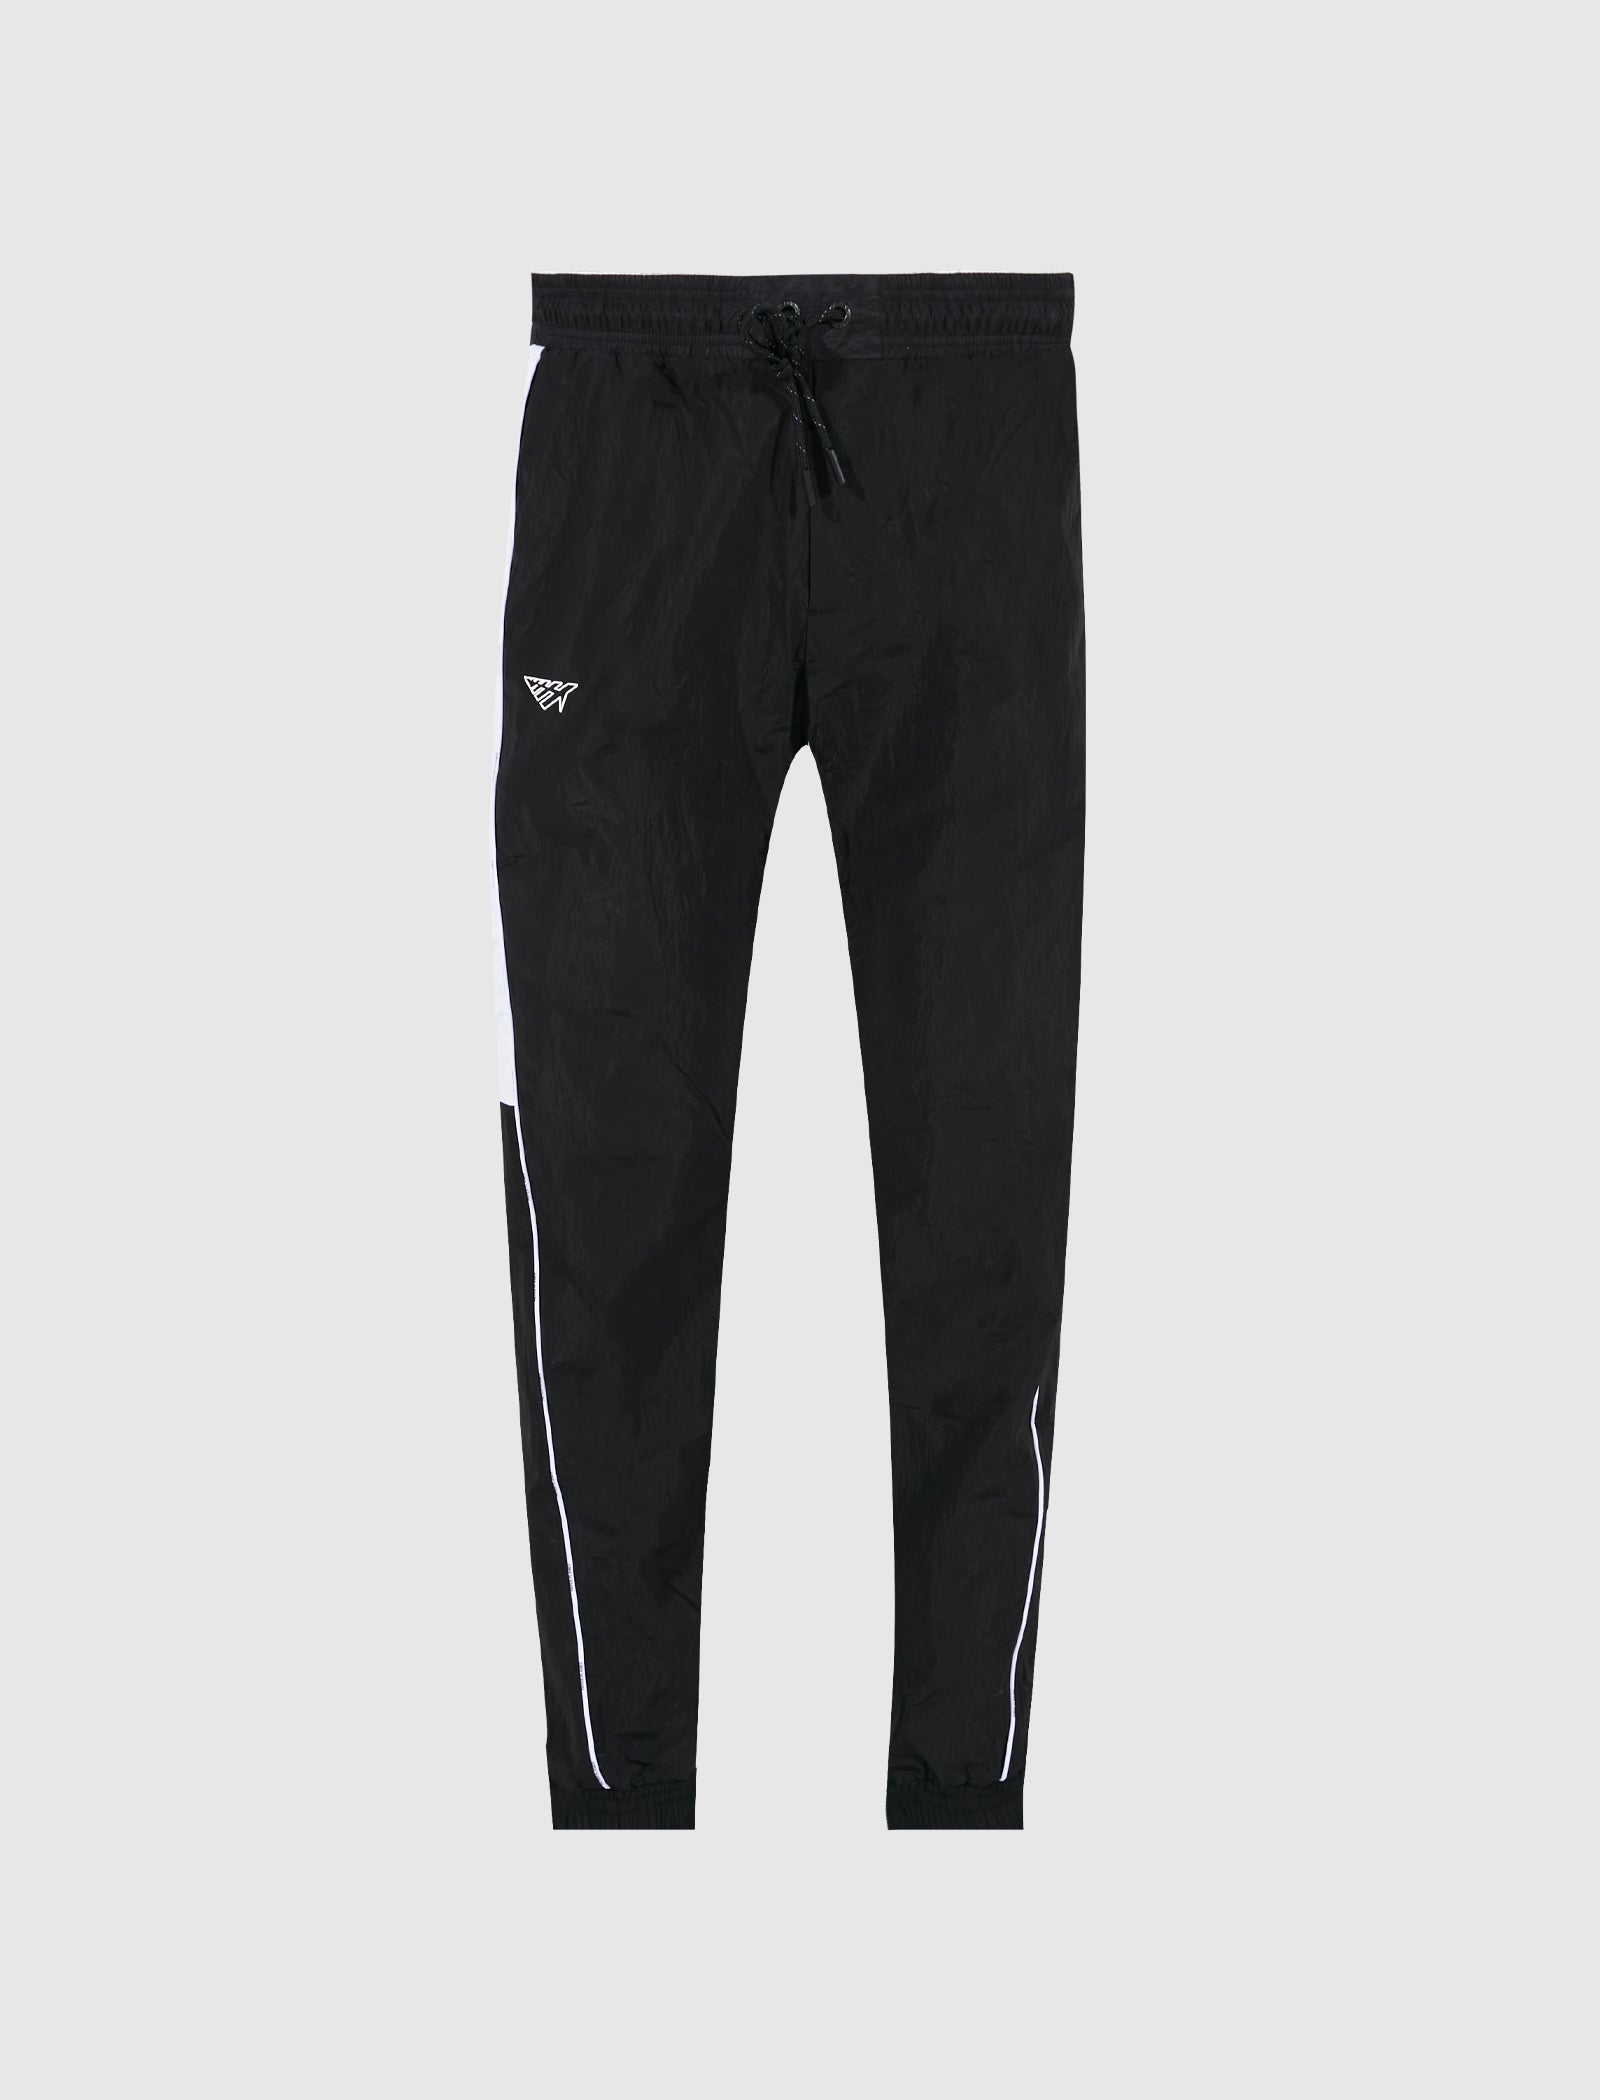 ROC NATION NOTORIOUS TRACK PANT